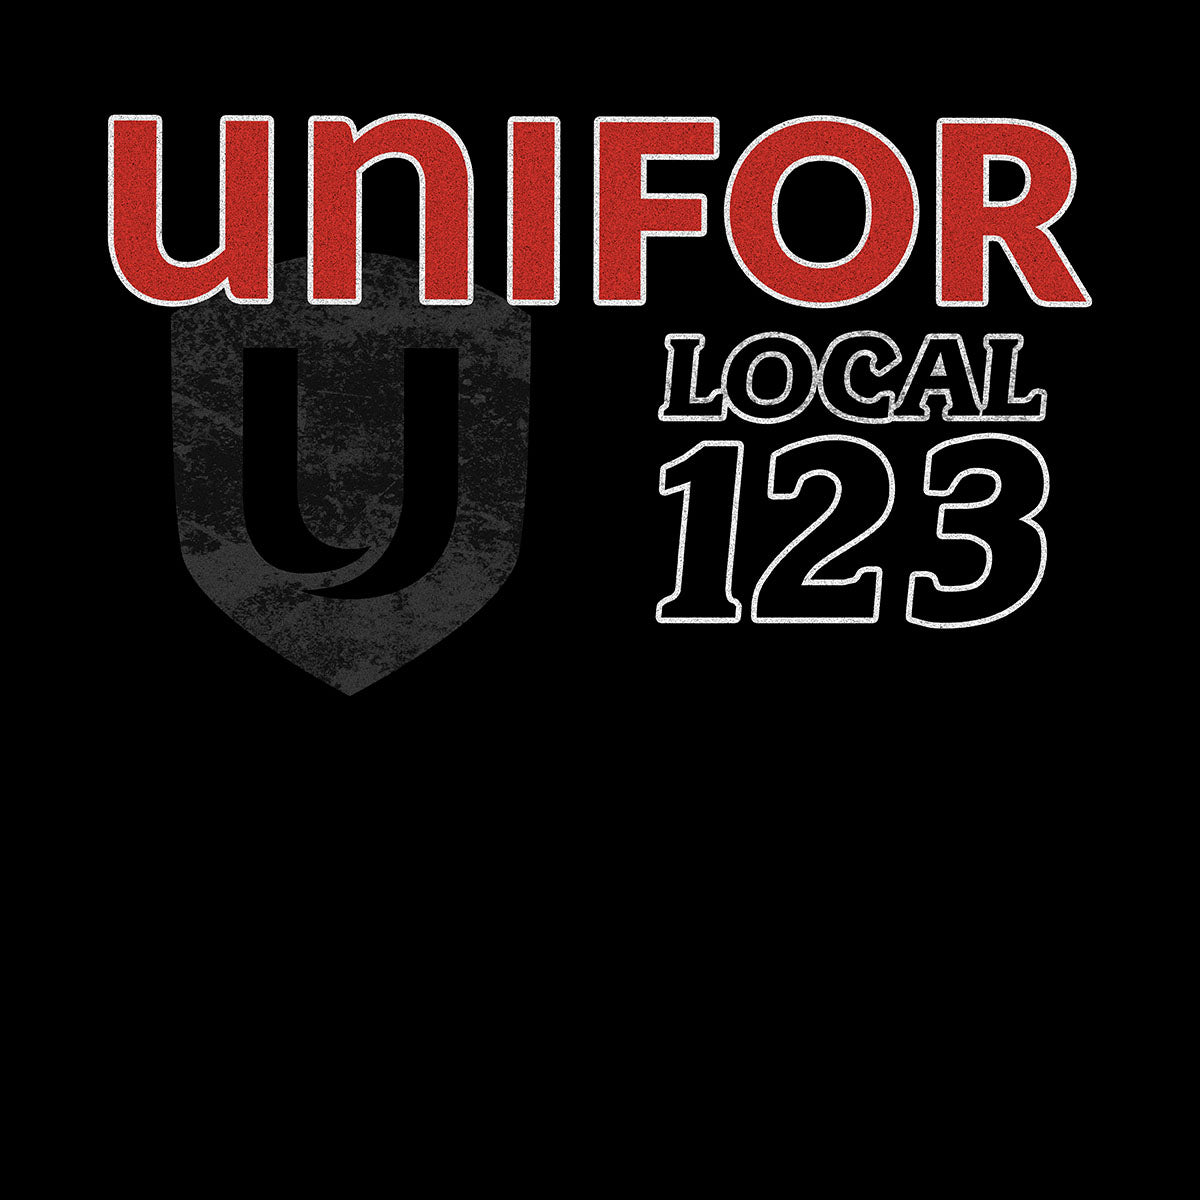 UNIFOR Bold Local Decal